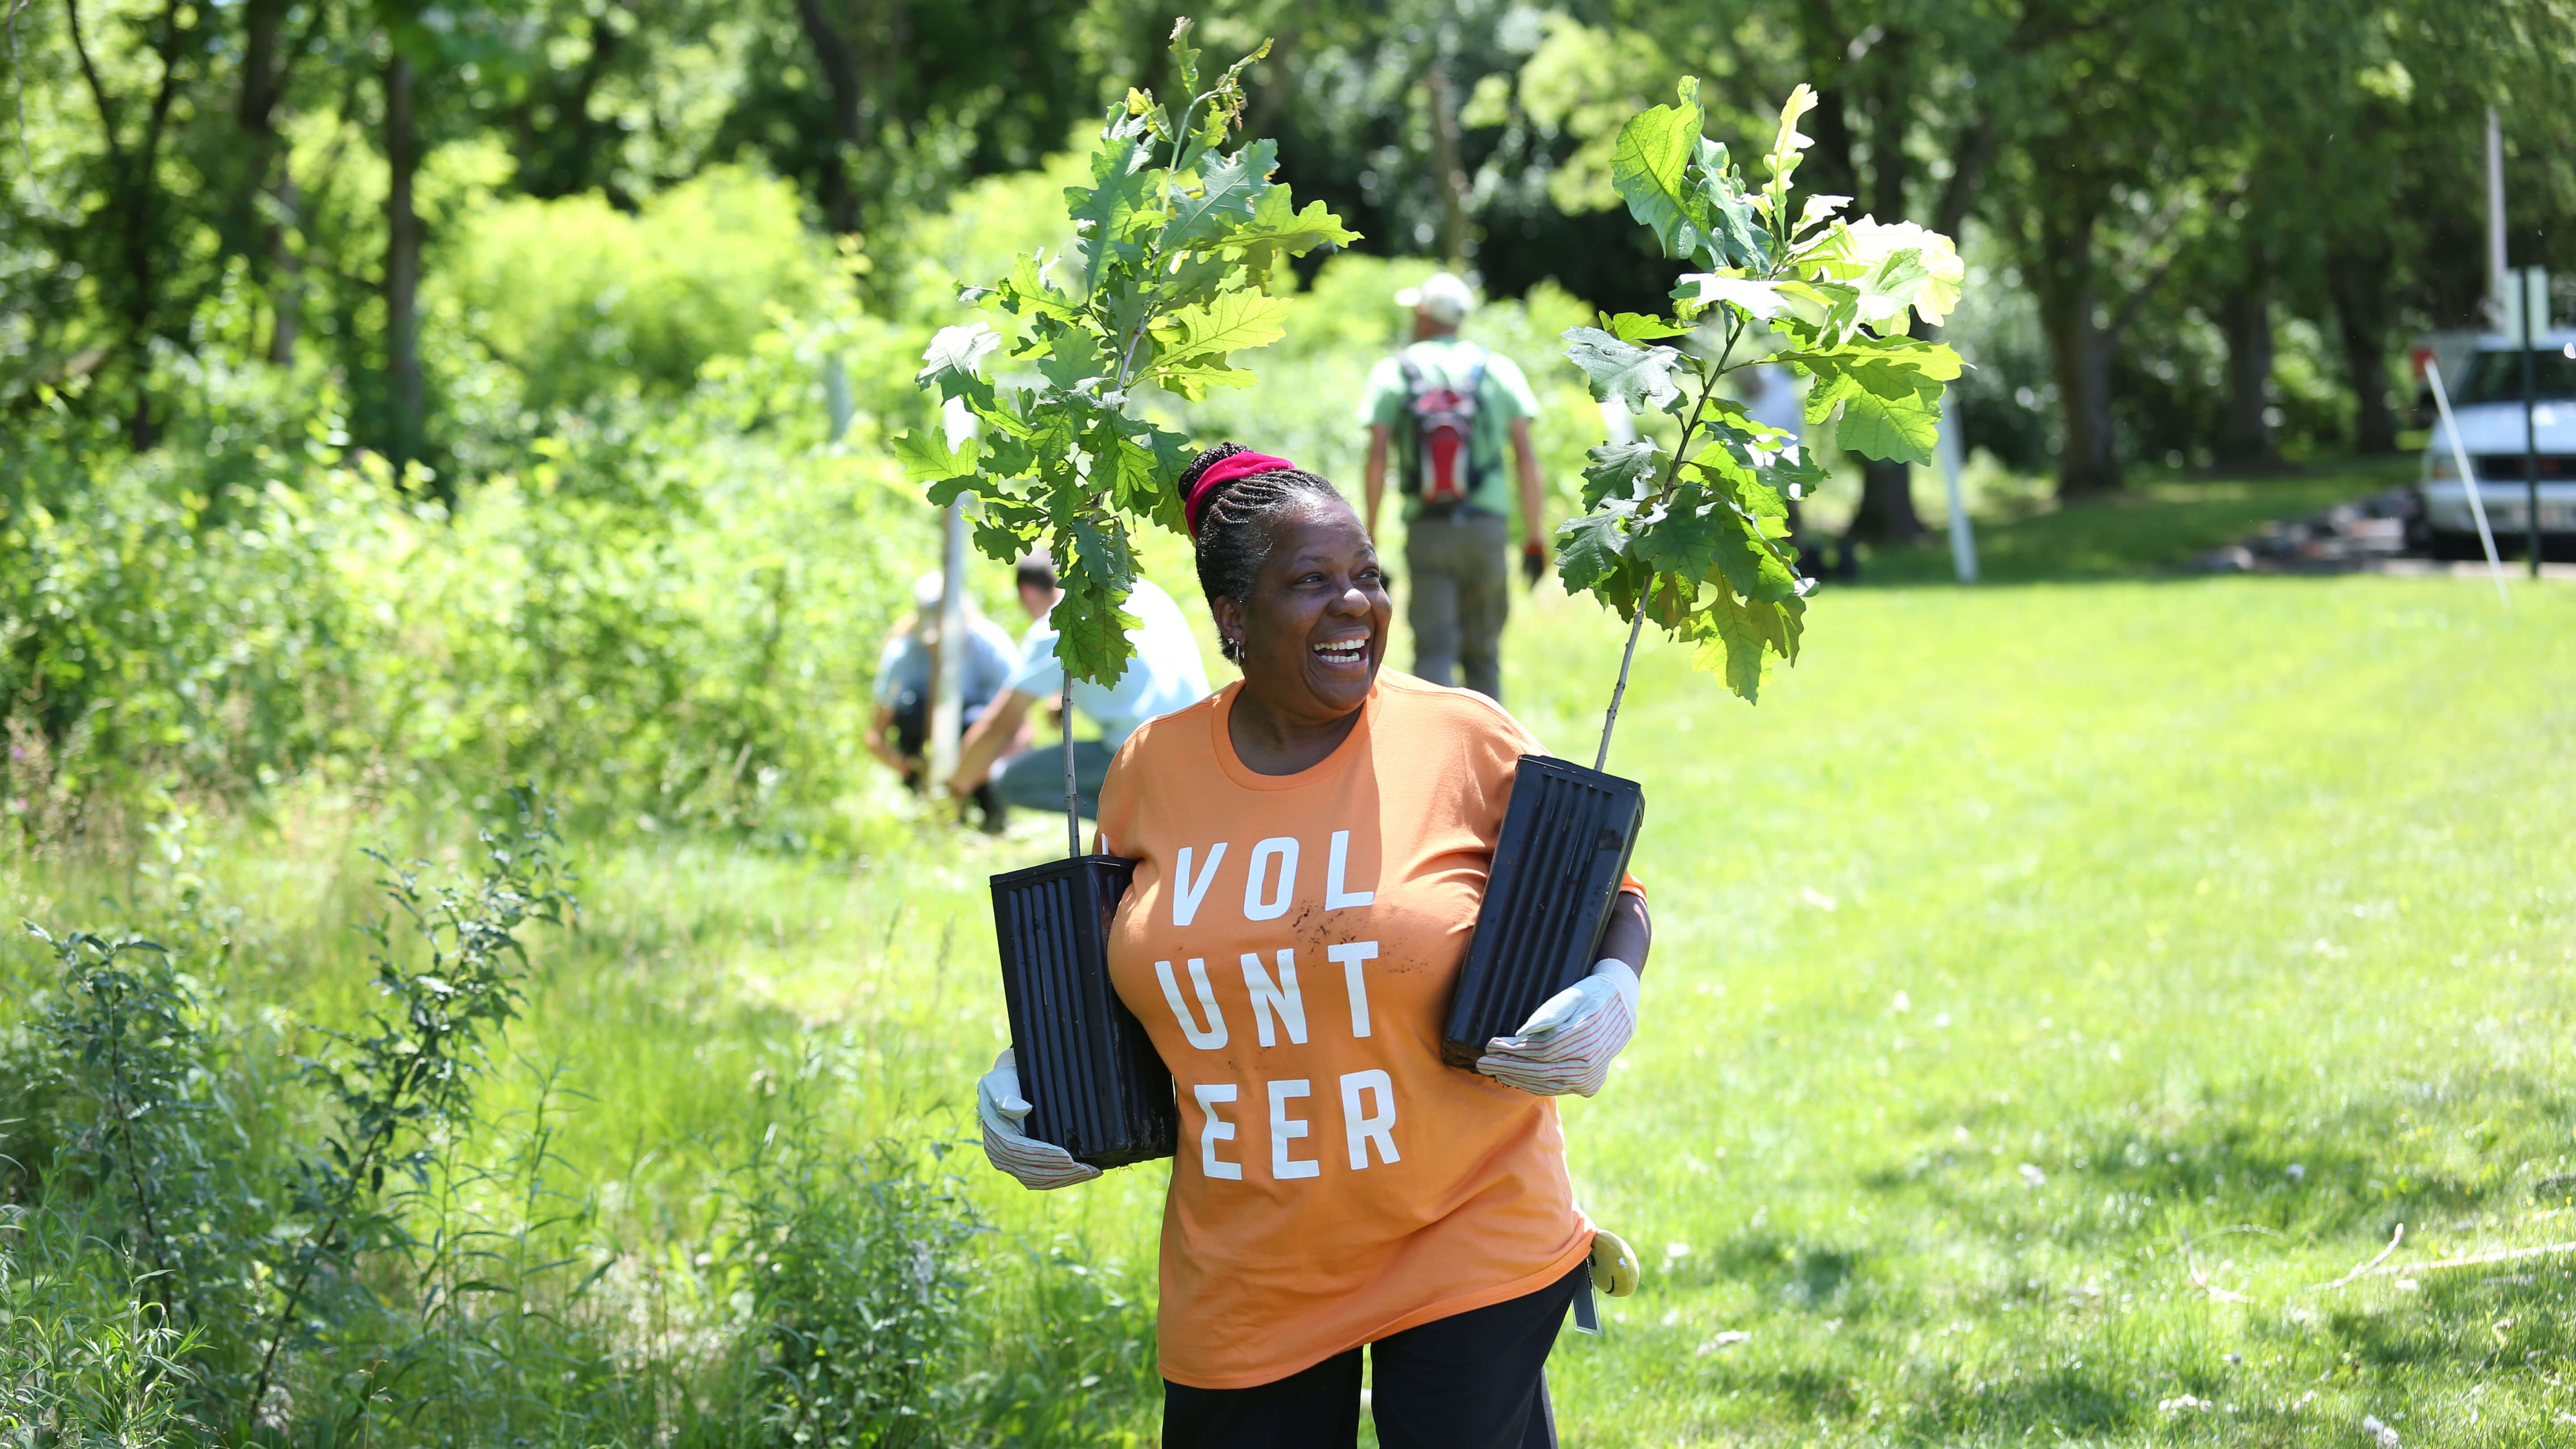 woman holding tree saplings and smiling while volunteering outdoors